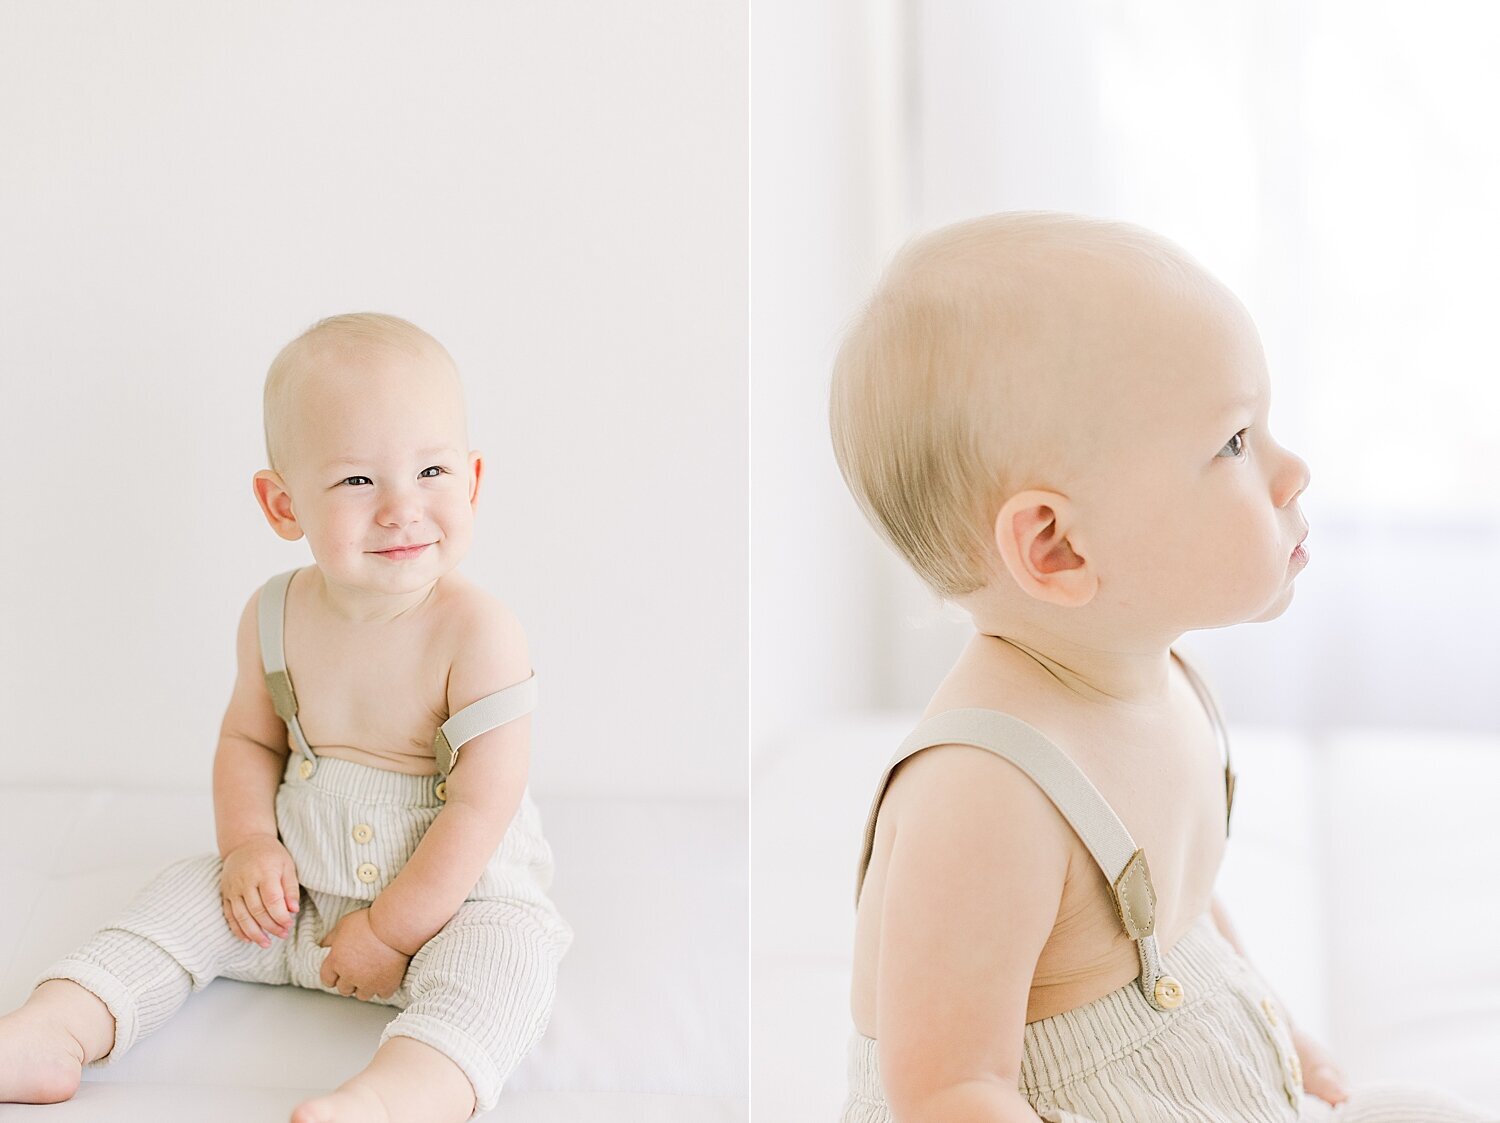 First birthday photoshoot in Newport Beach, CA studio. Photos by Ambre Williams Photography.